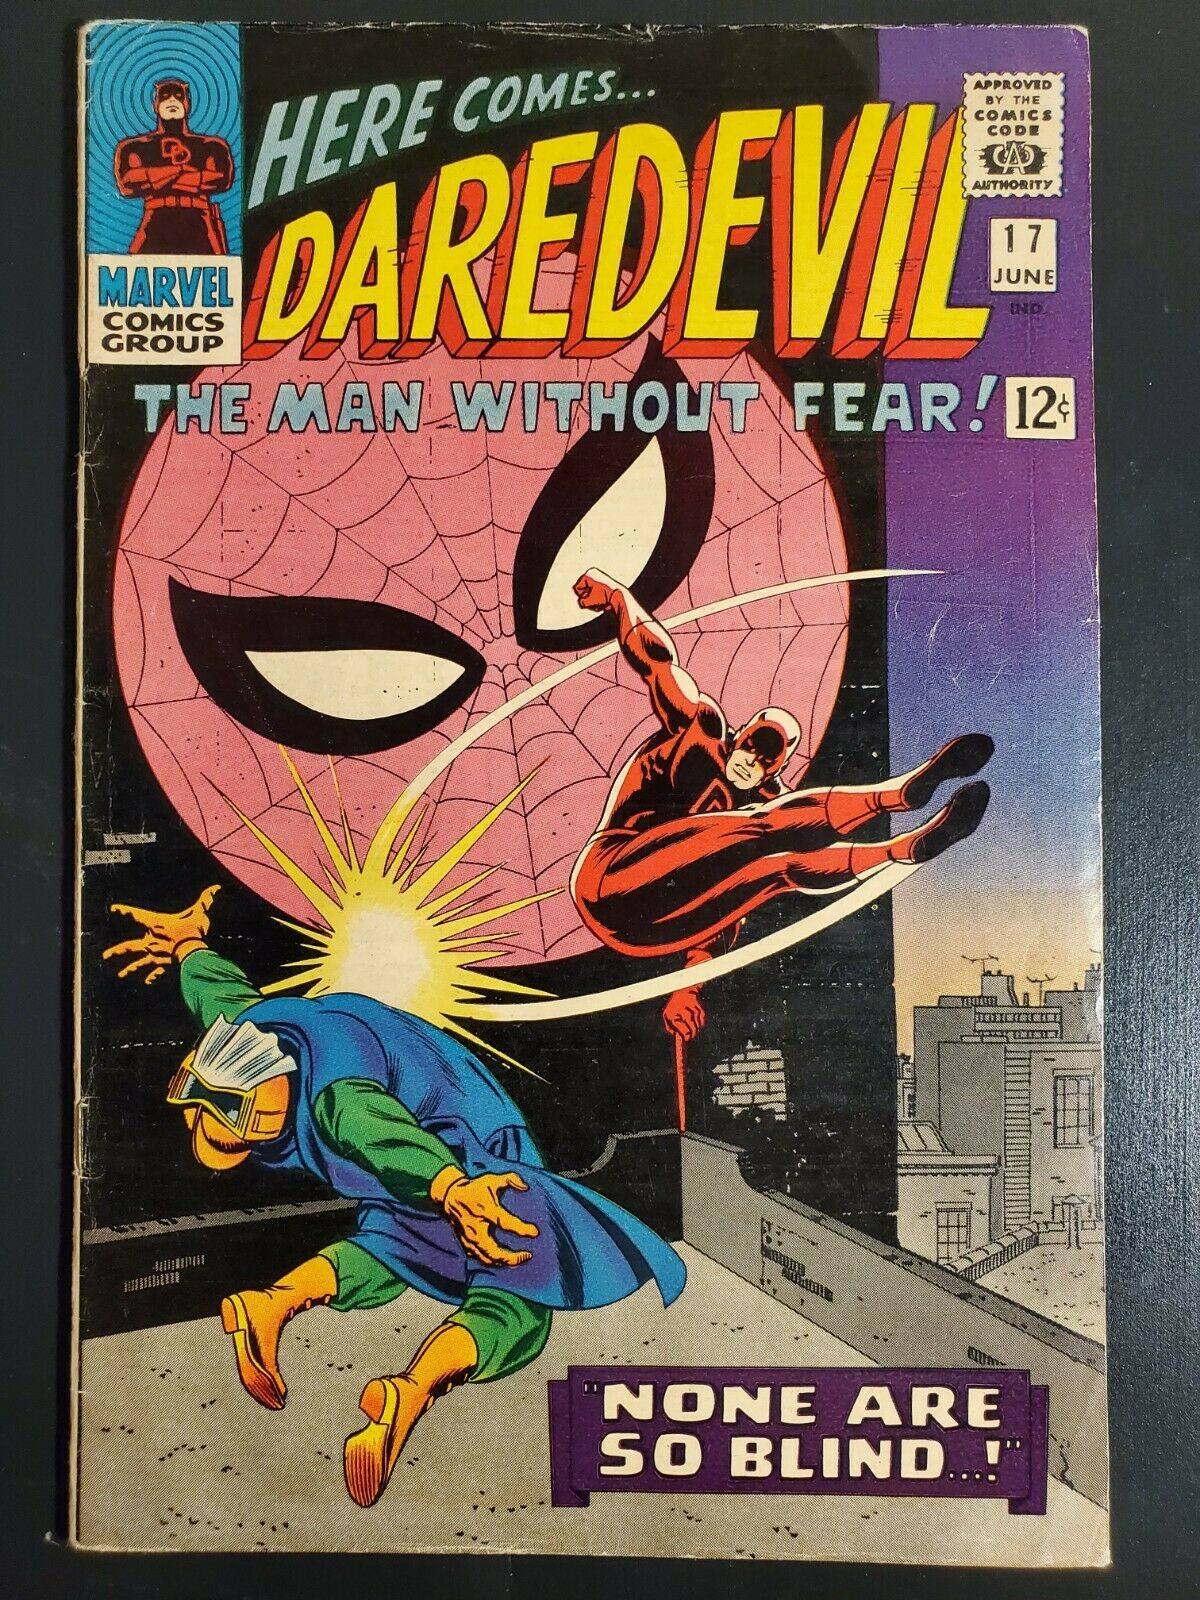 | Daredevil #17 (1966) FN+ (6.5) early Spider-Man cross-over Stan Lee ...